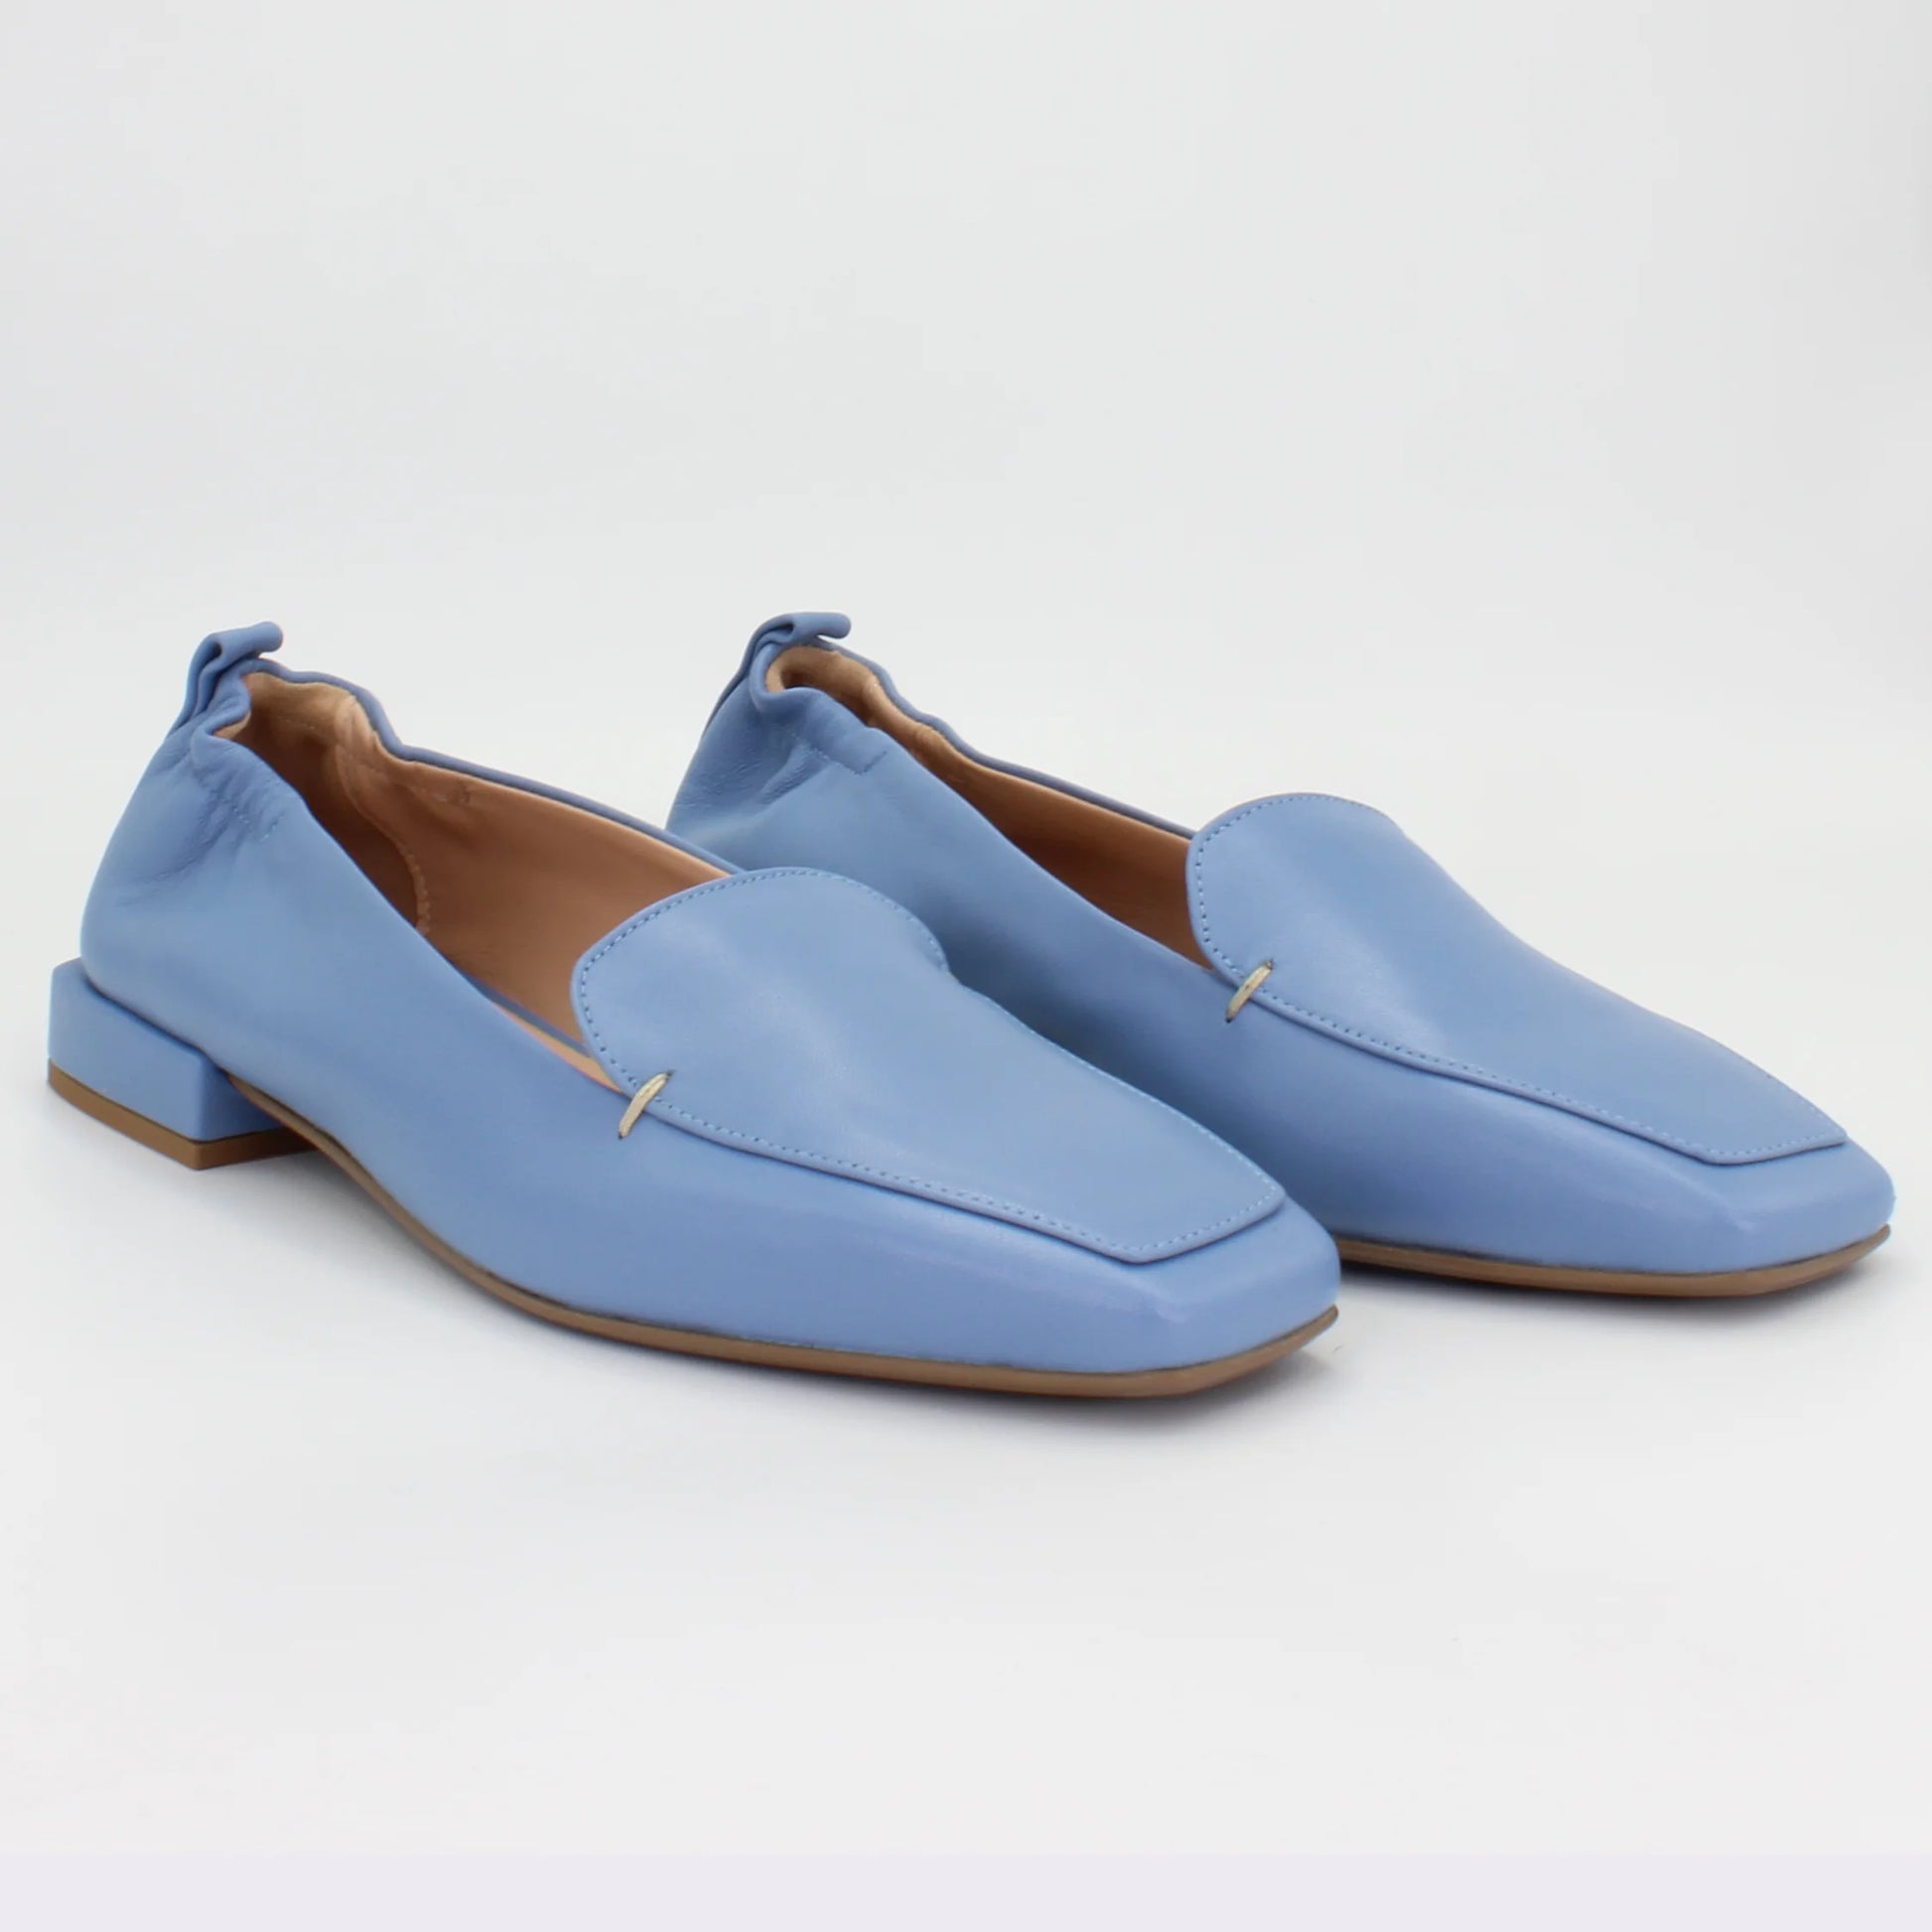 Shop Handmade Italian Leather loafer in denim nappa (DARIA18) or browse our range of hand-made Italian shoes in leather or suede in-store at Aliverti Cape Town, or shop online. We deliver in South Africa & offer multiple payment plans as well as accept multiple safe & secure payment methods.